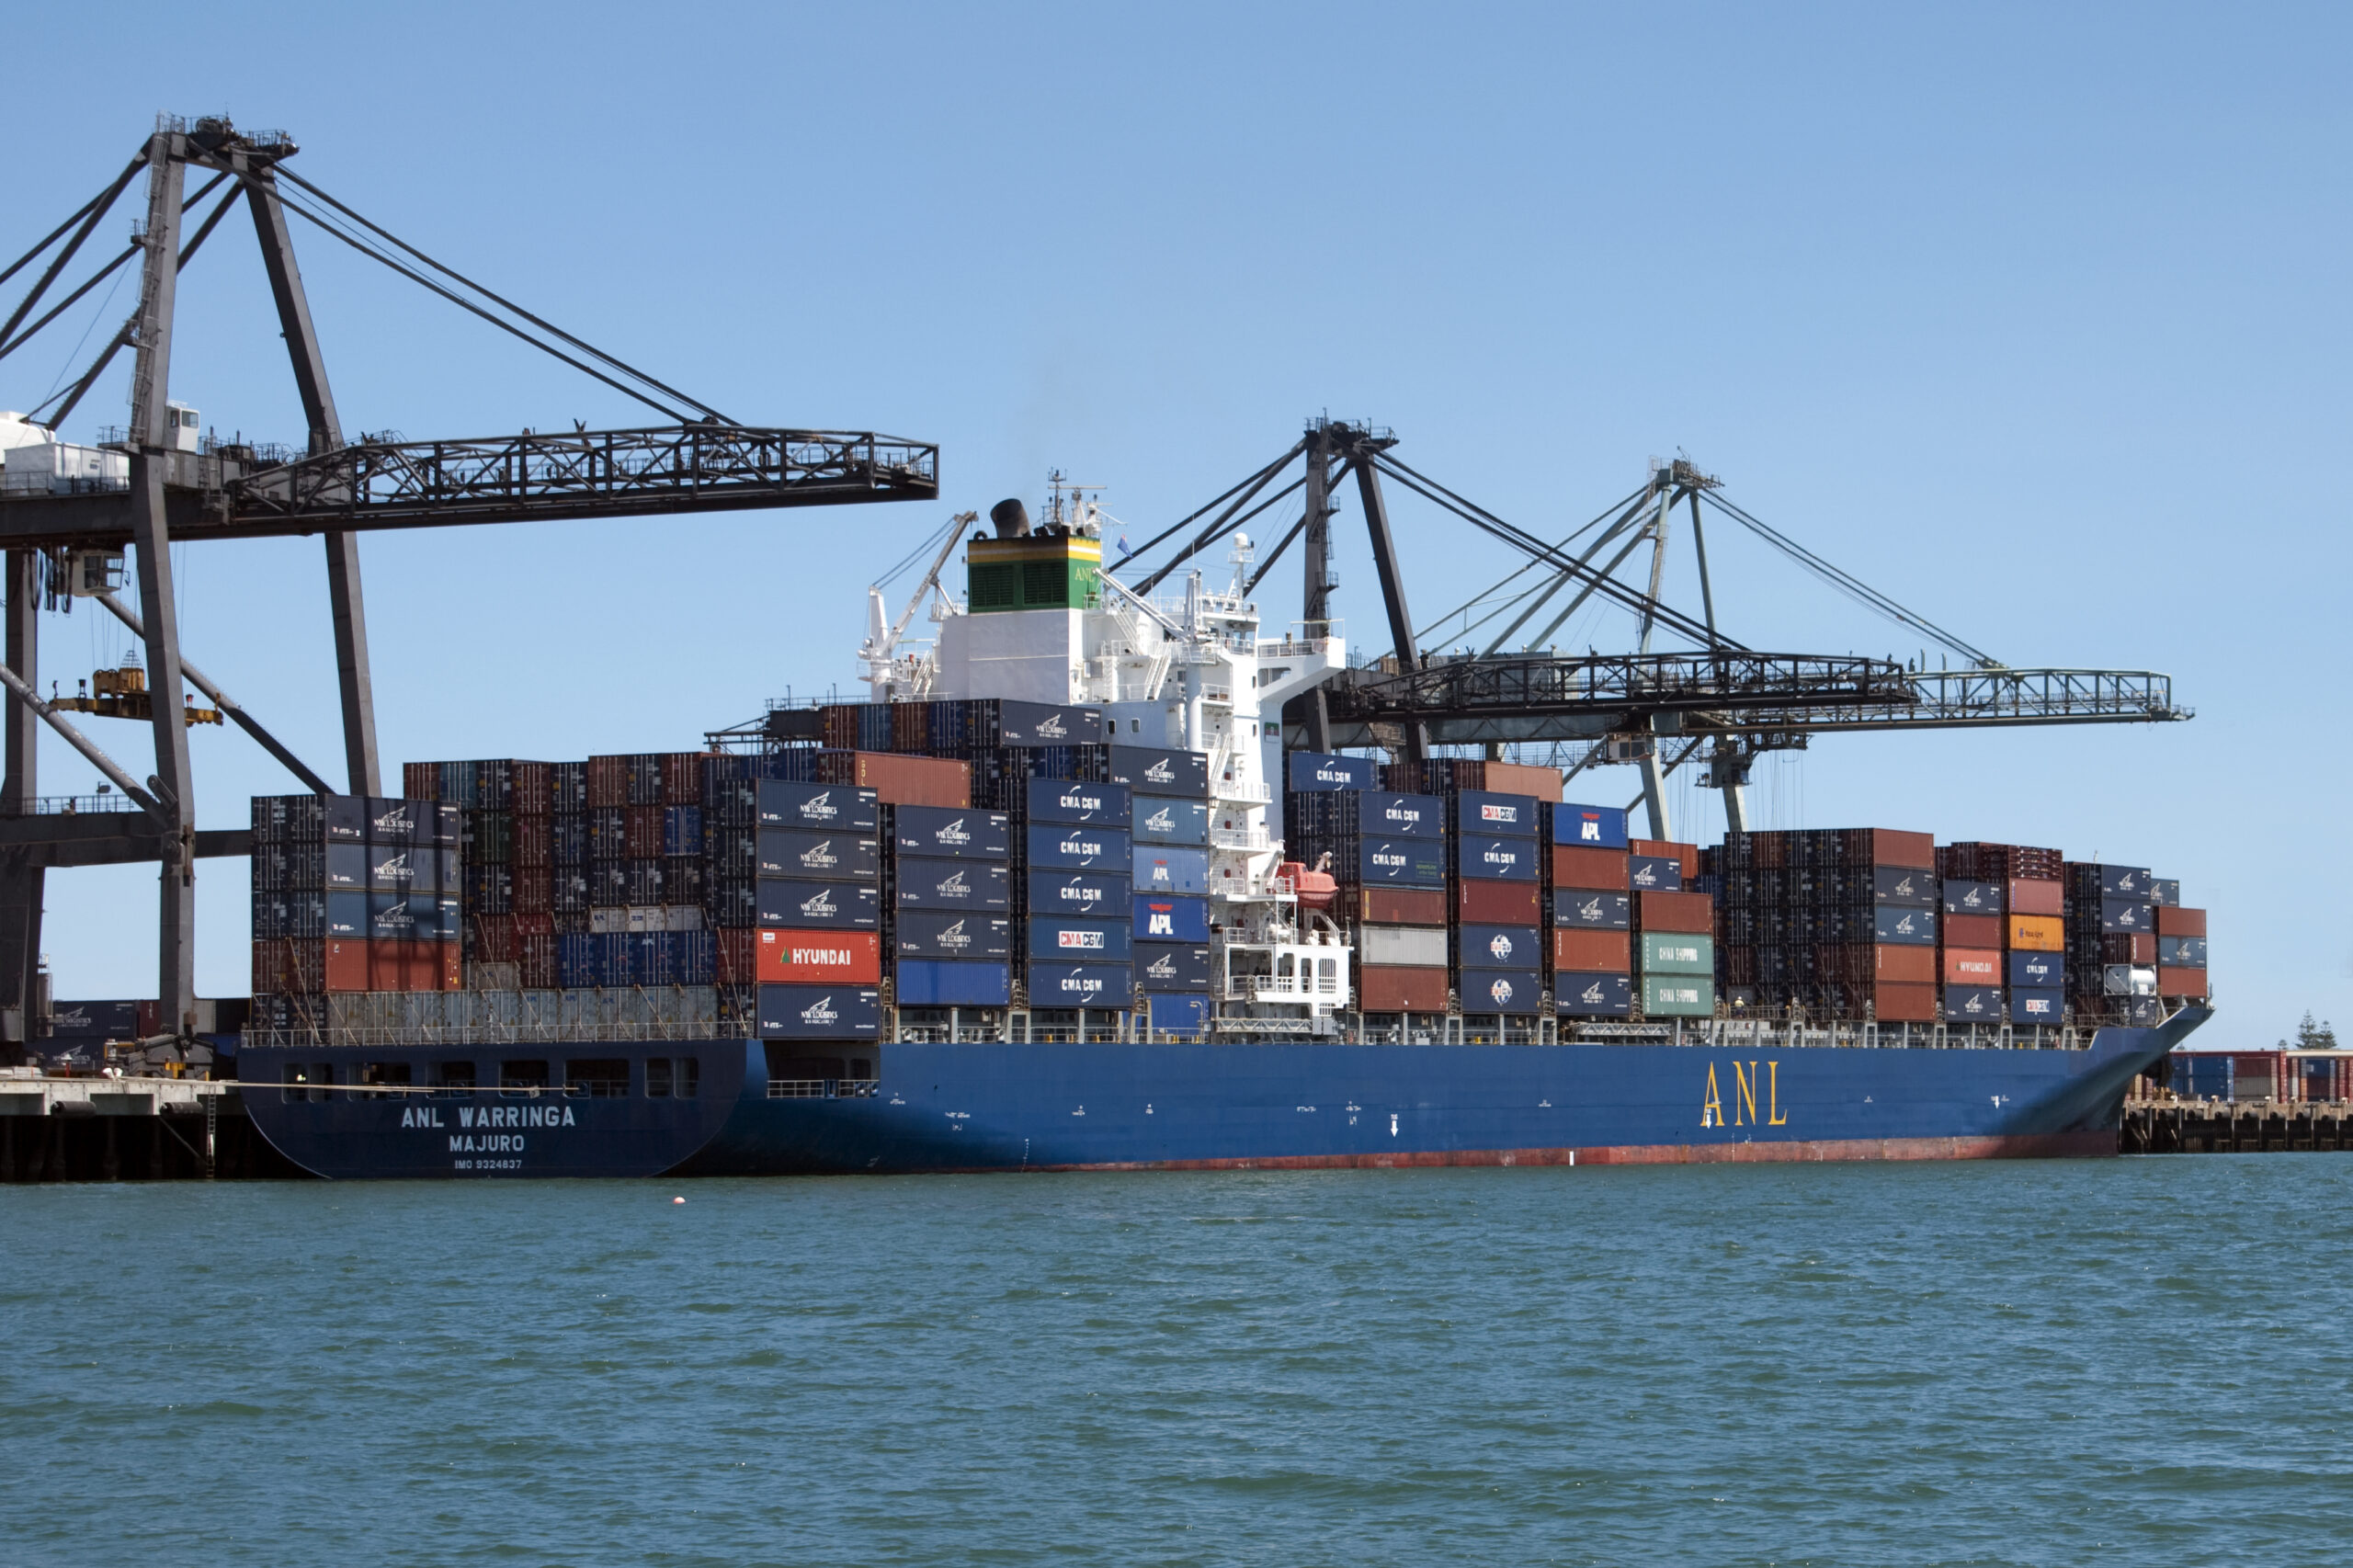 3 Things To Look For In The Bigger, Safer, More Energy Efficient Port Of The Future